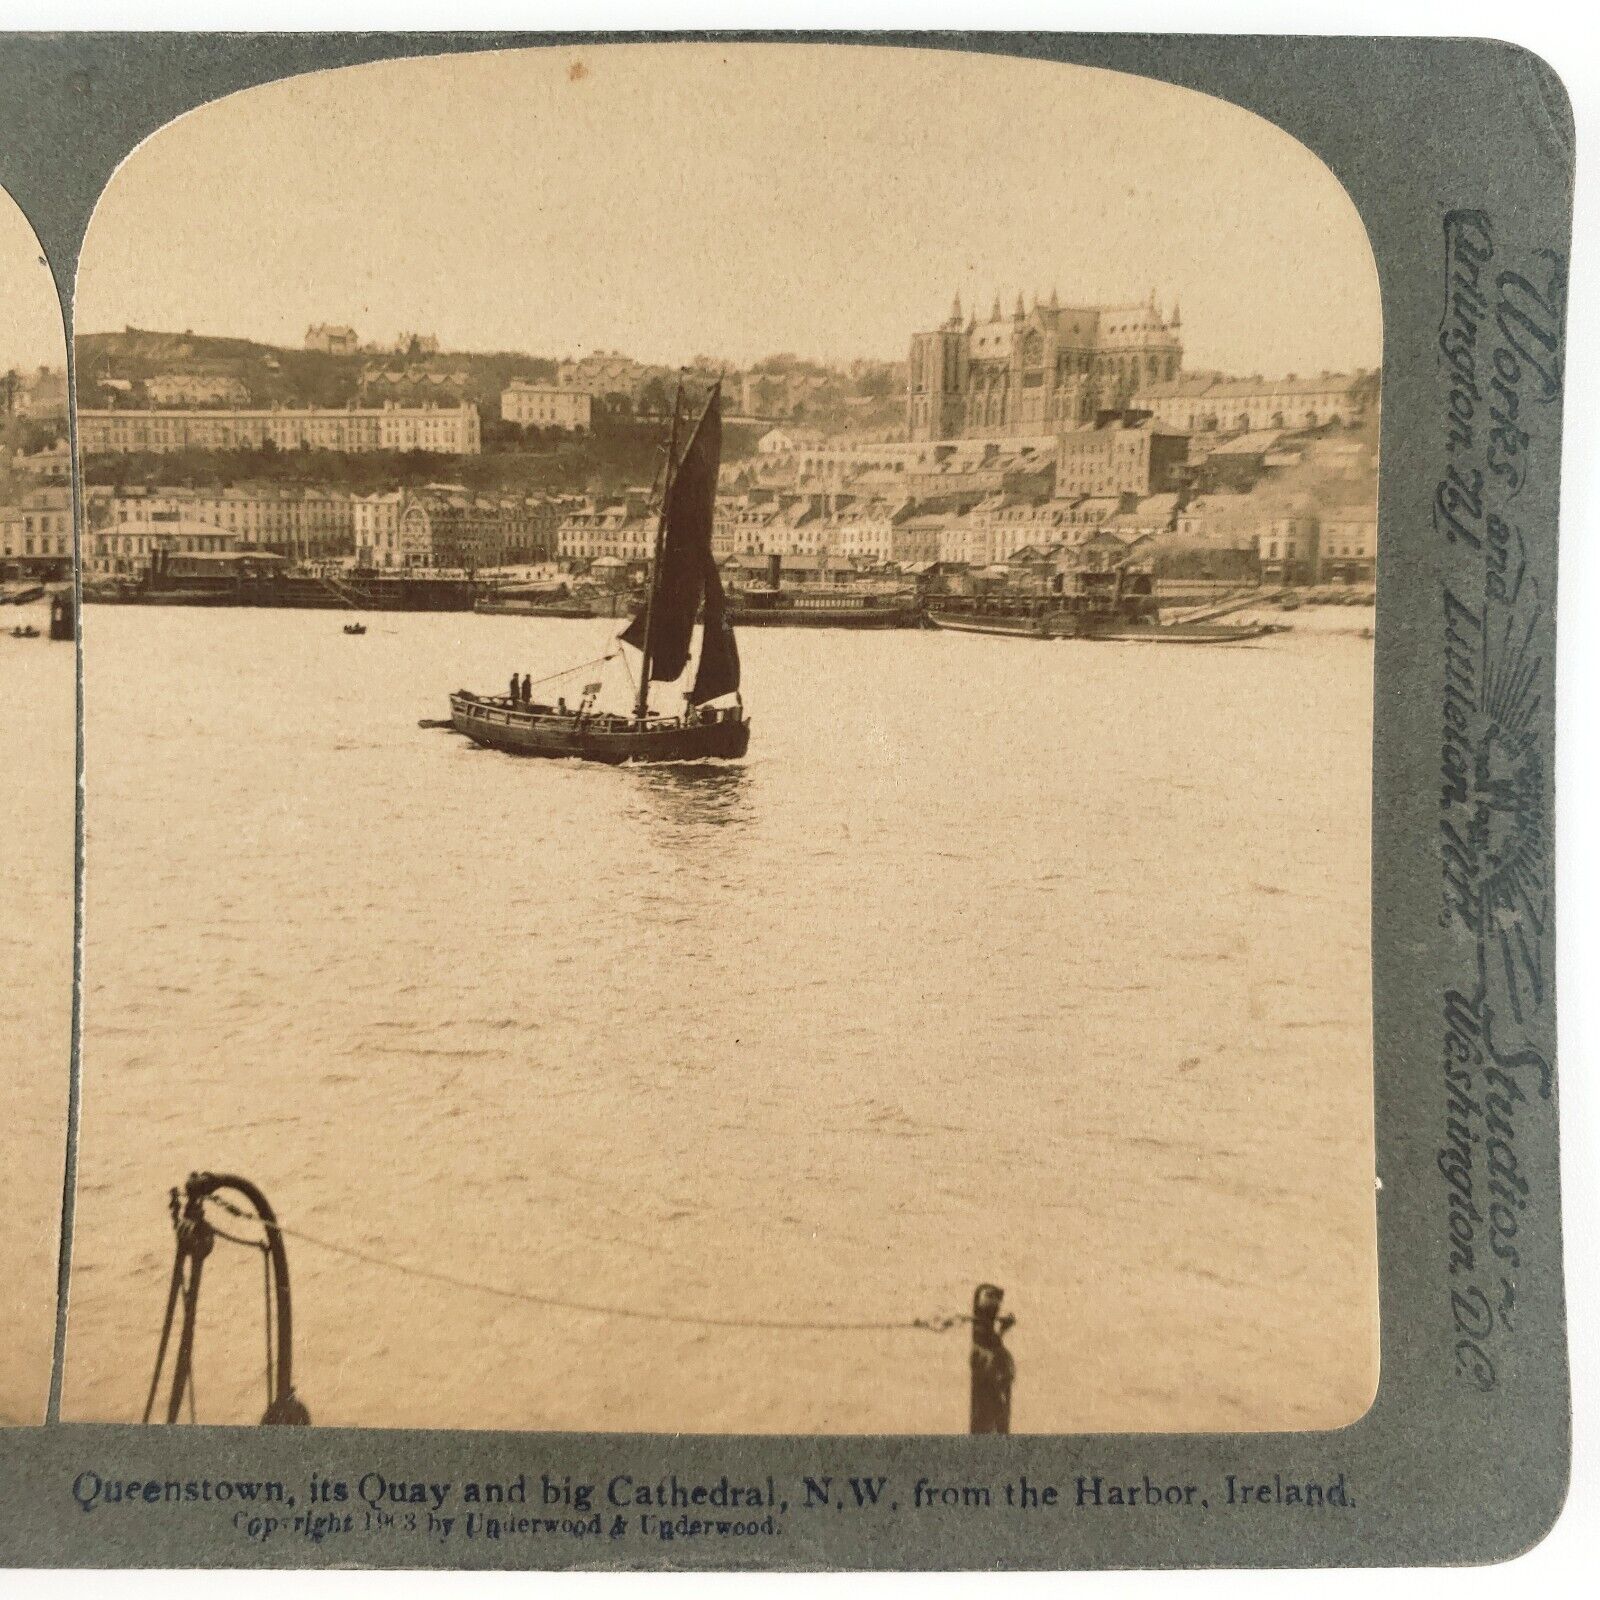 Cobh Ireland Harbor Sailboat Stereoview c1903 Queenstown Skyline Boats A2462